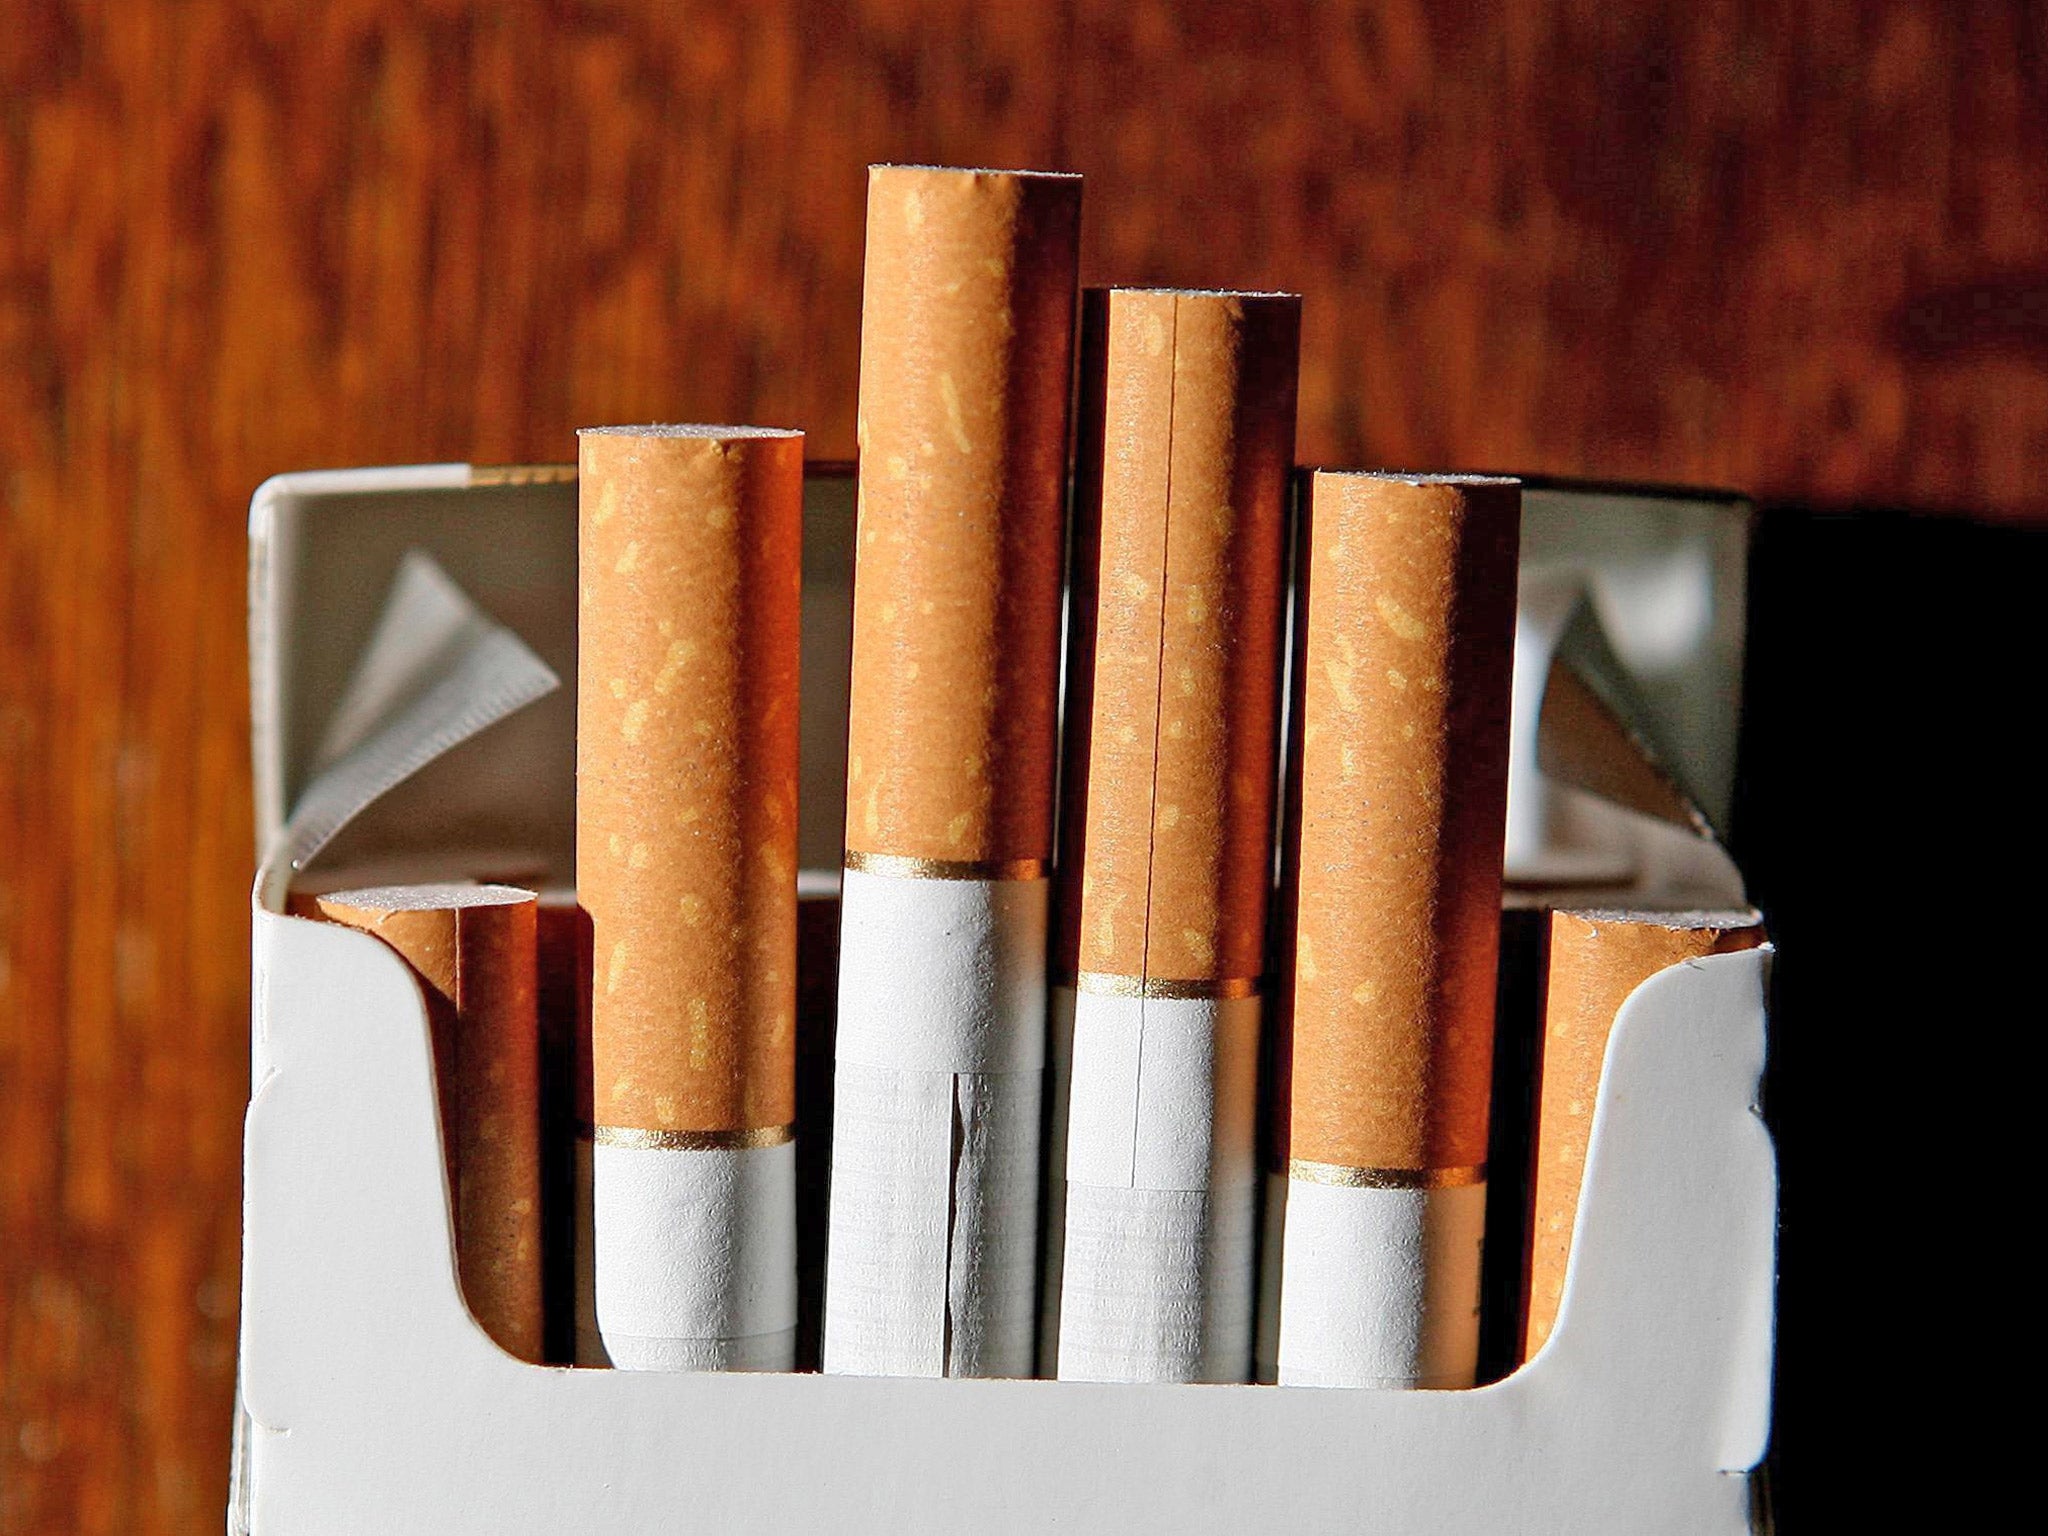 The Government postponed its decision on whether to introduce plain packaging last year